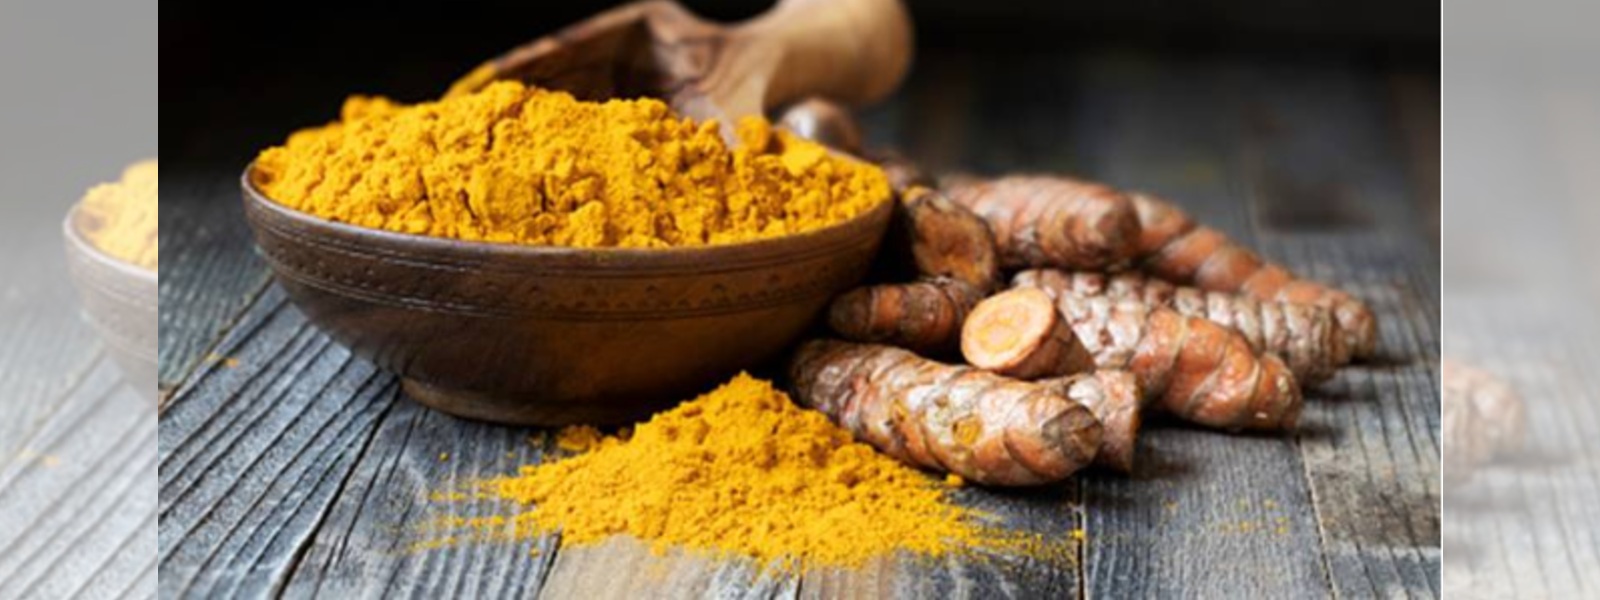 CAA inspects quality of Turmeric in local market